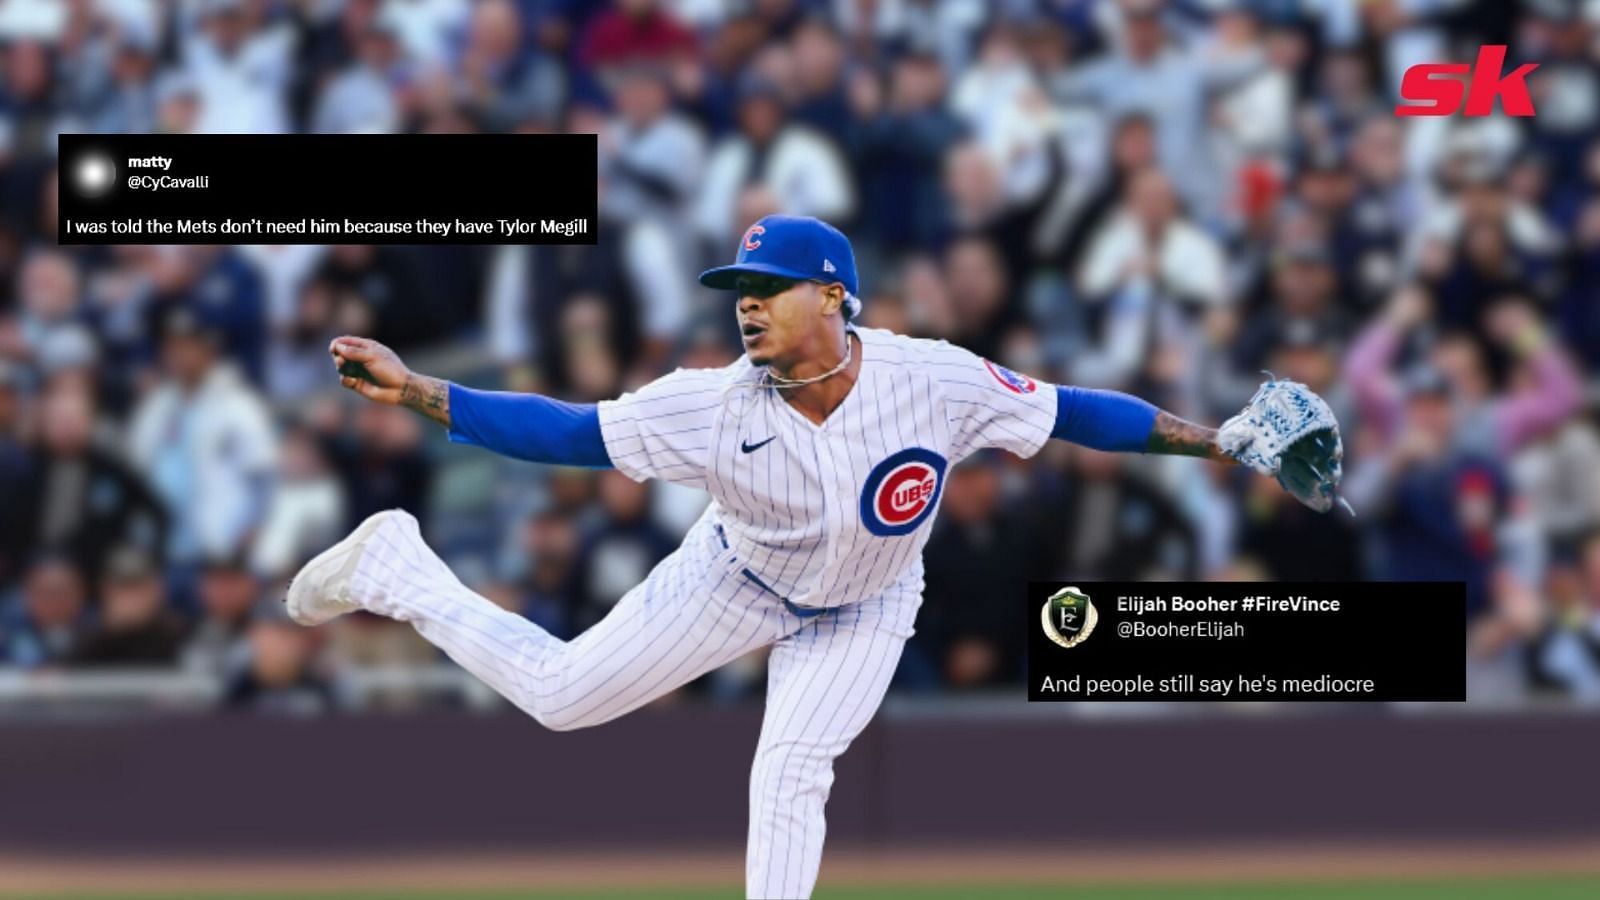 Chicago Cubs: Marcus Stroman posts series of troubling tweets